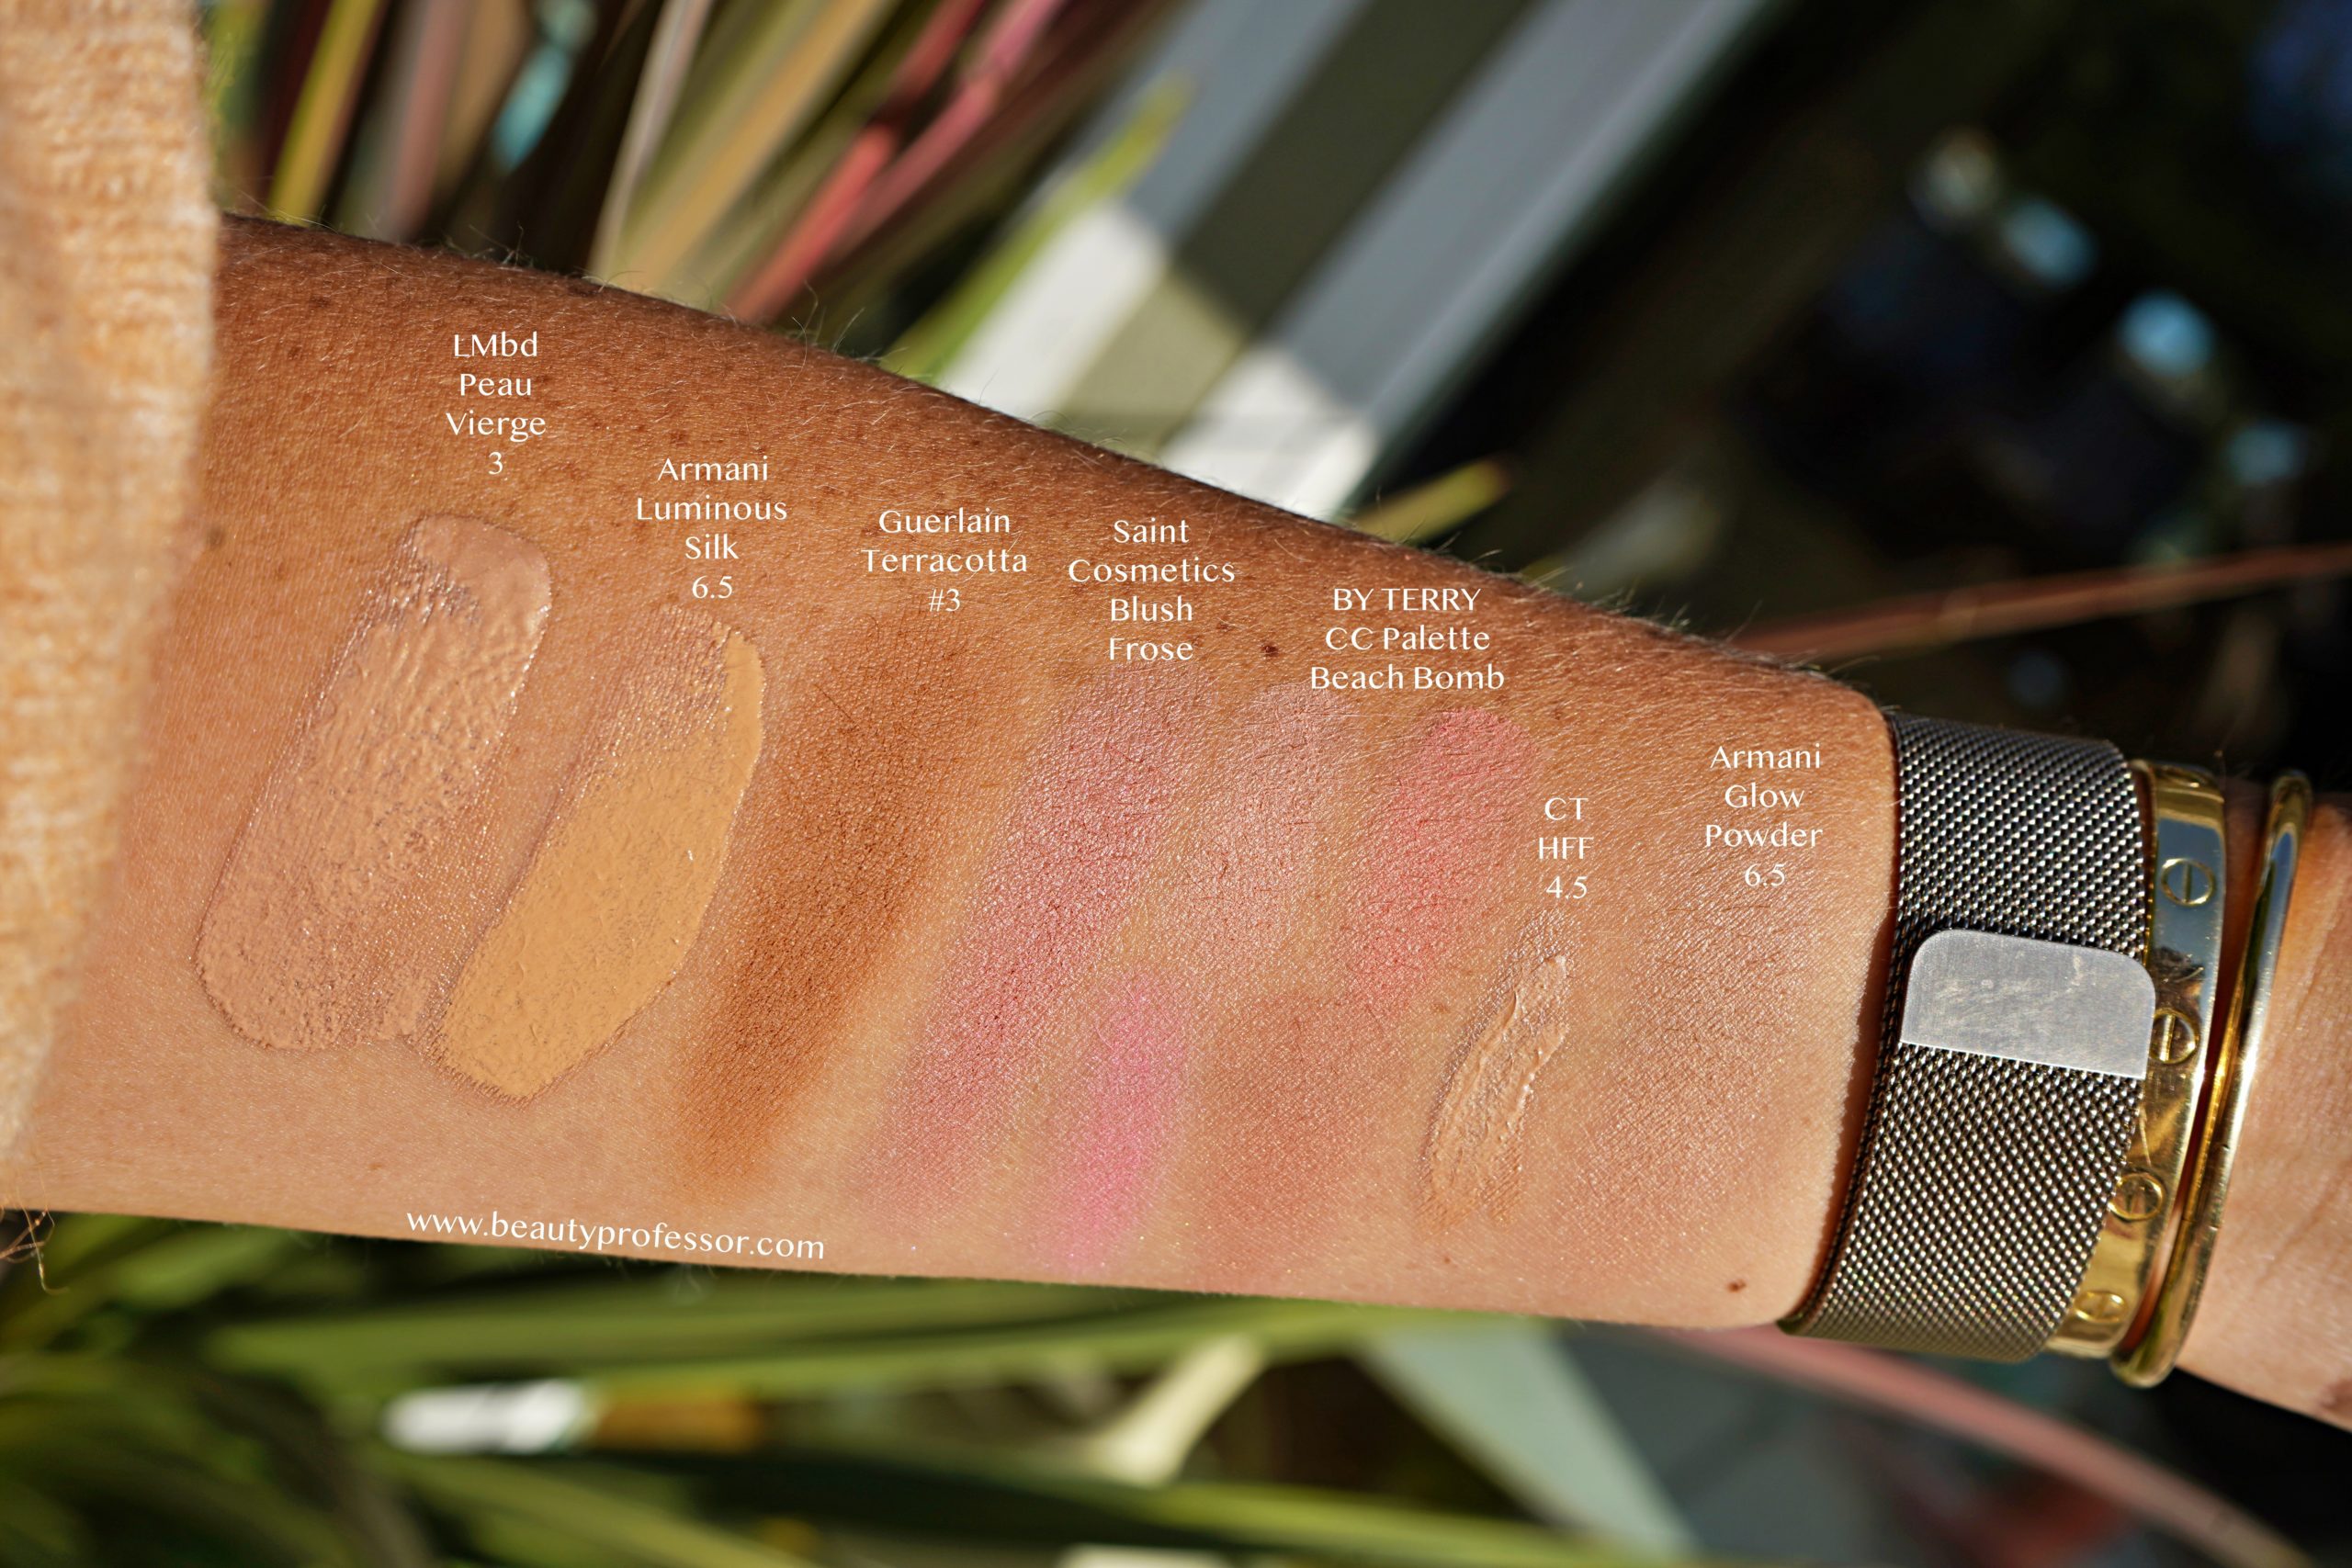 Base and face swatches in direct sunlight